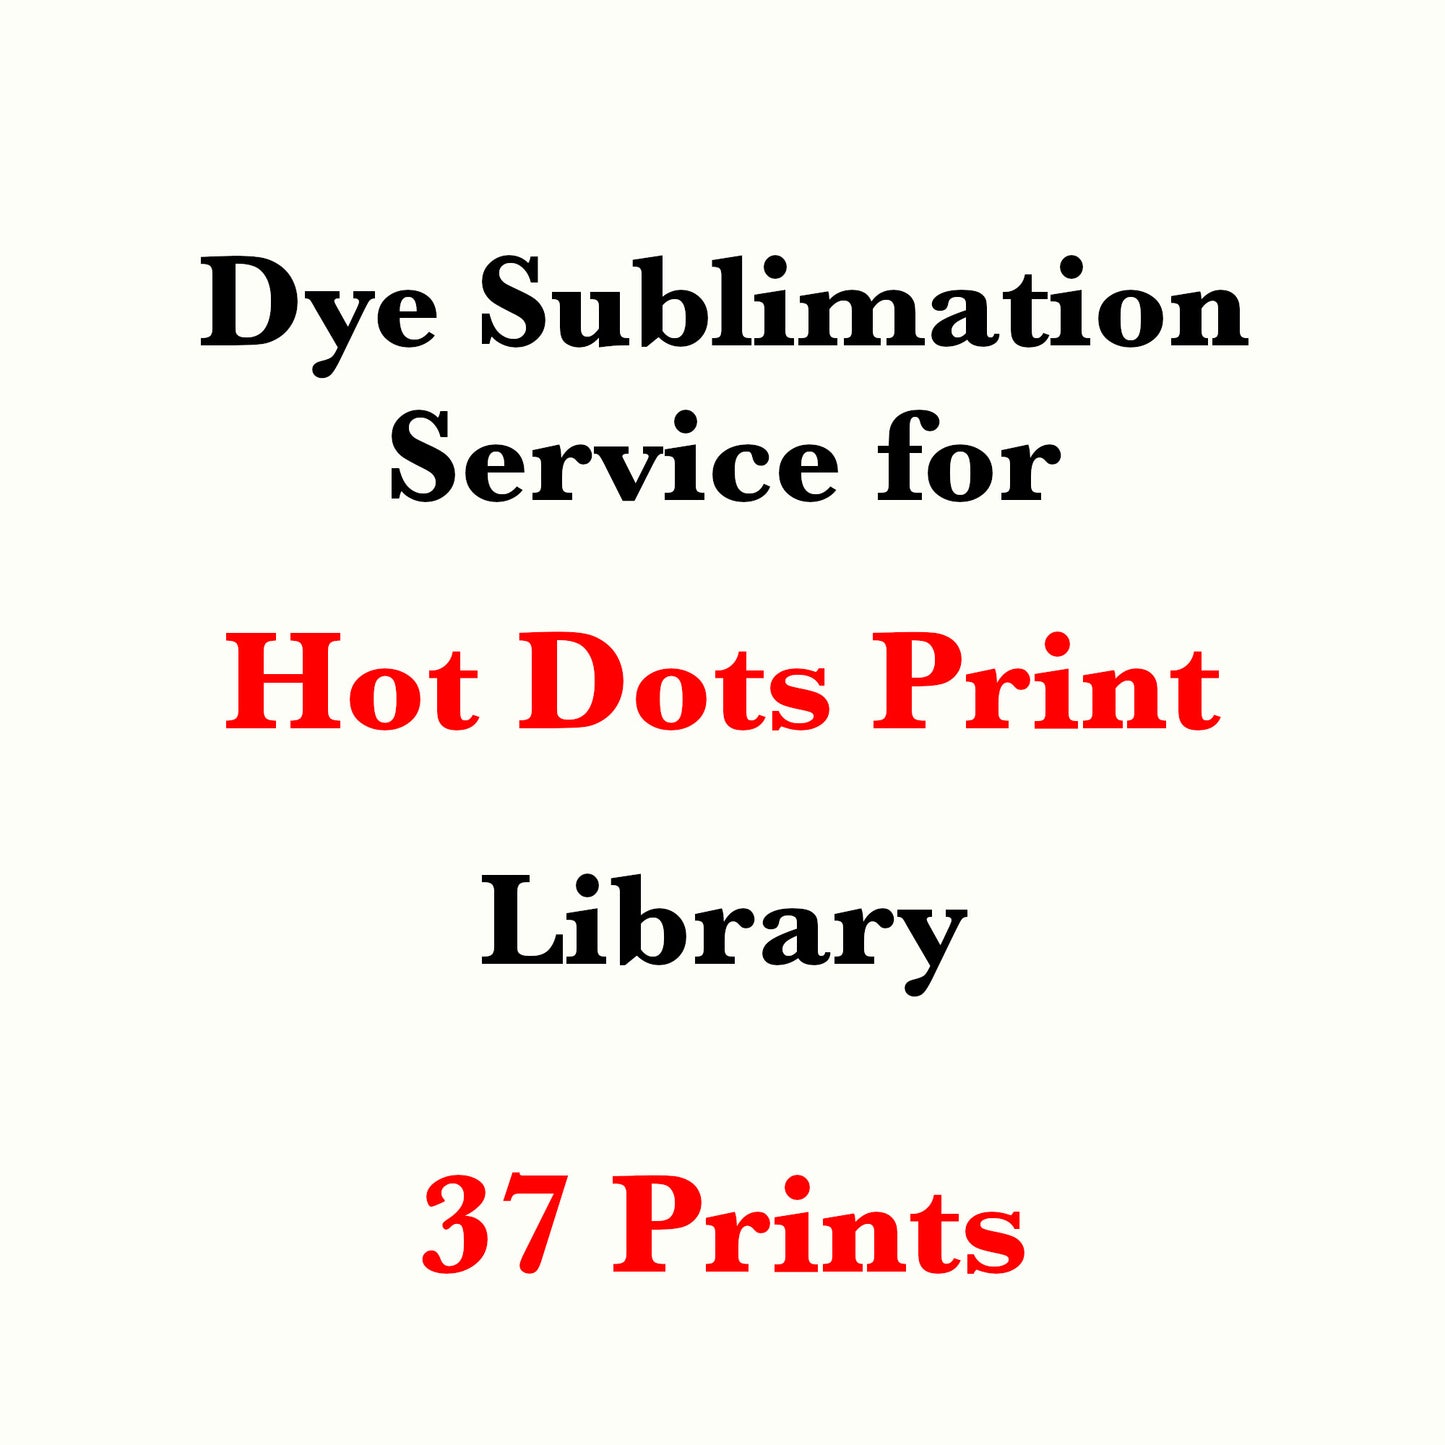 Dye sublimation service for Hot Dots Print Library(Sold by the Yard)